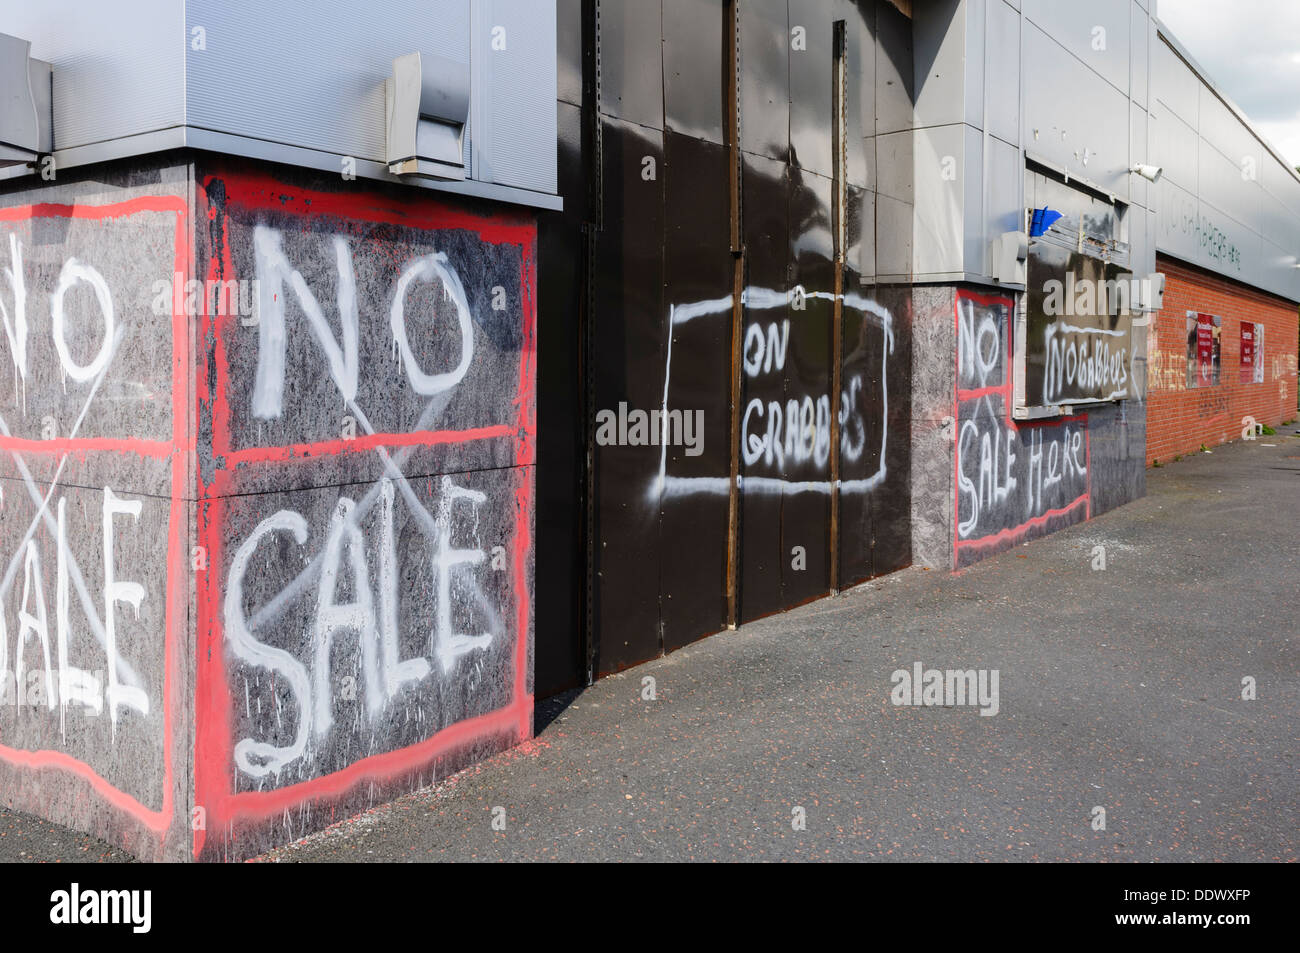 Graffiti on Quinn's superstore in Crossmaglen saying 'No Sale' and 'No Grabbers' warning investors not to buy the site. Stock Photo